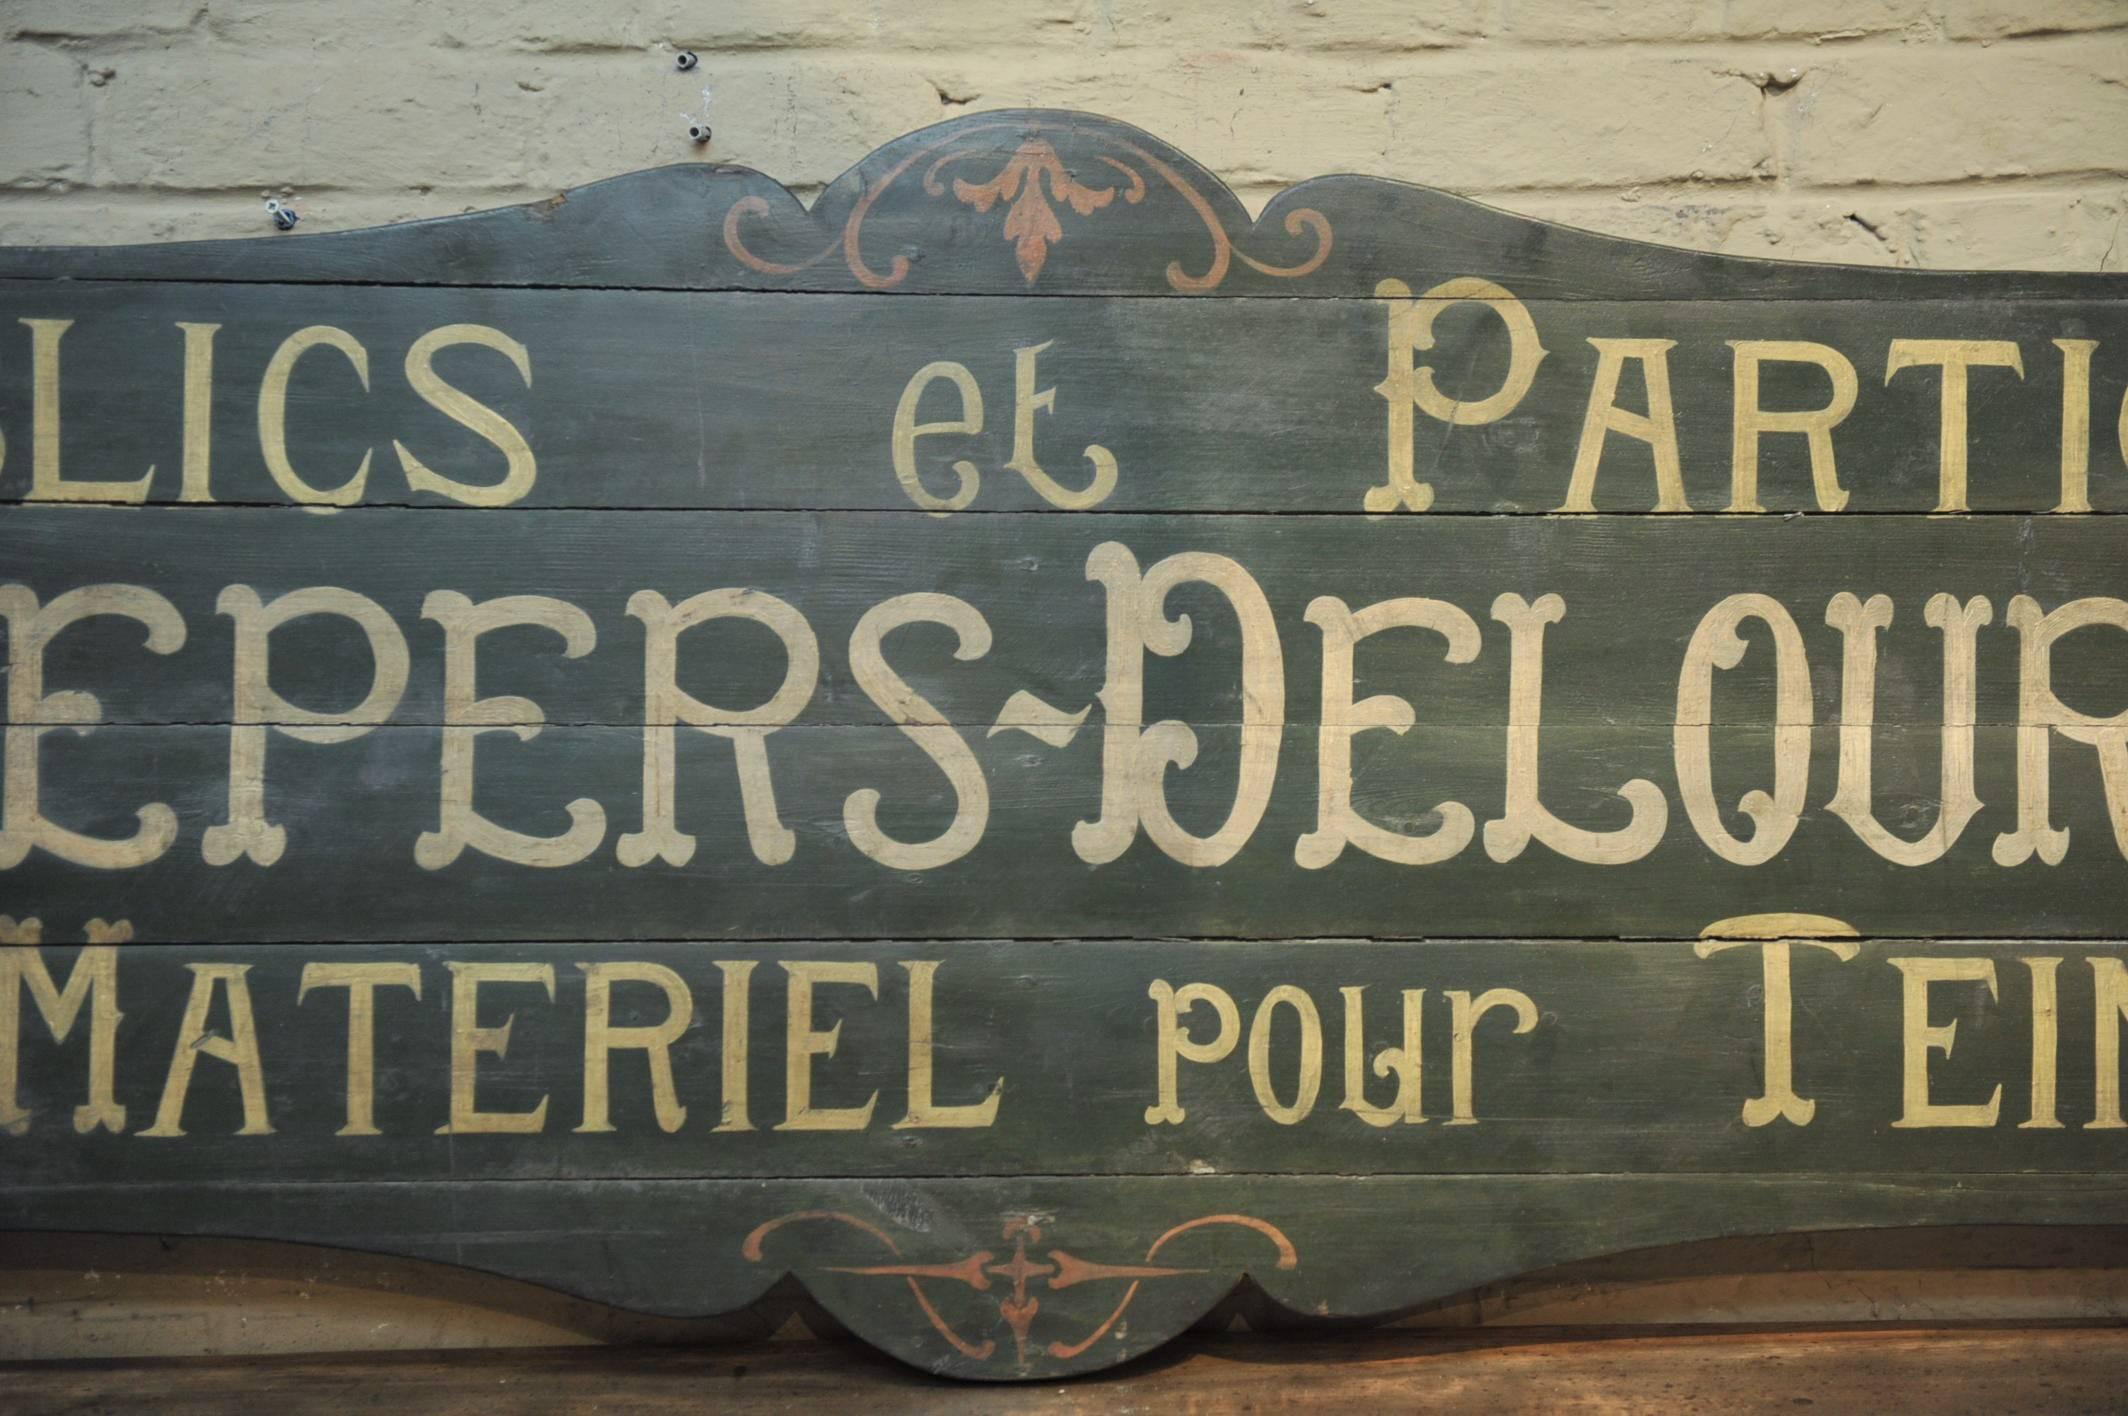 French Comercial sign on wood panel, circa 1930. All original:
